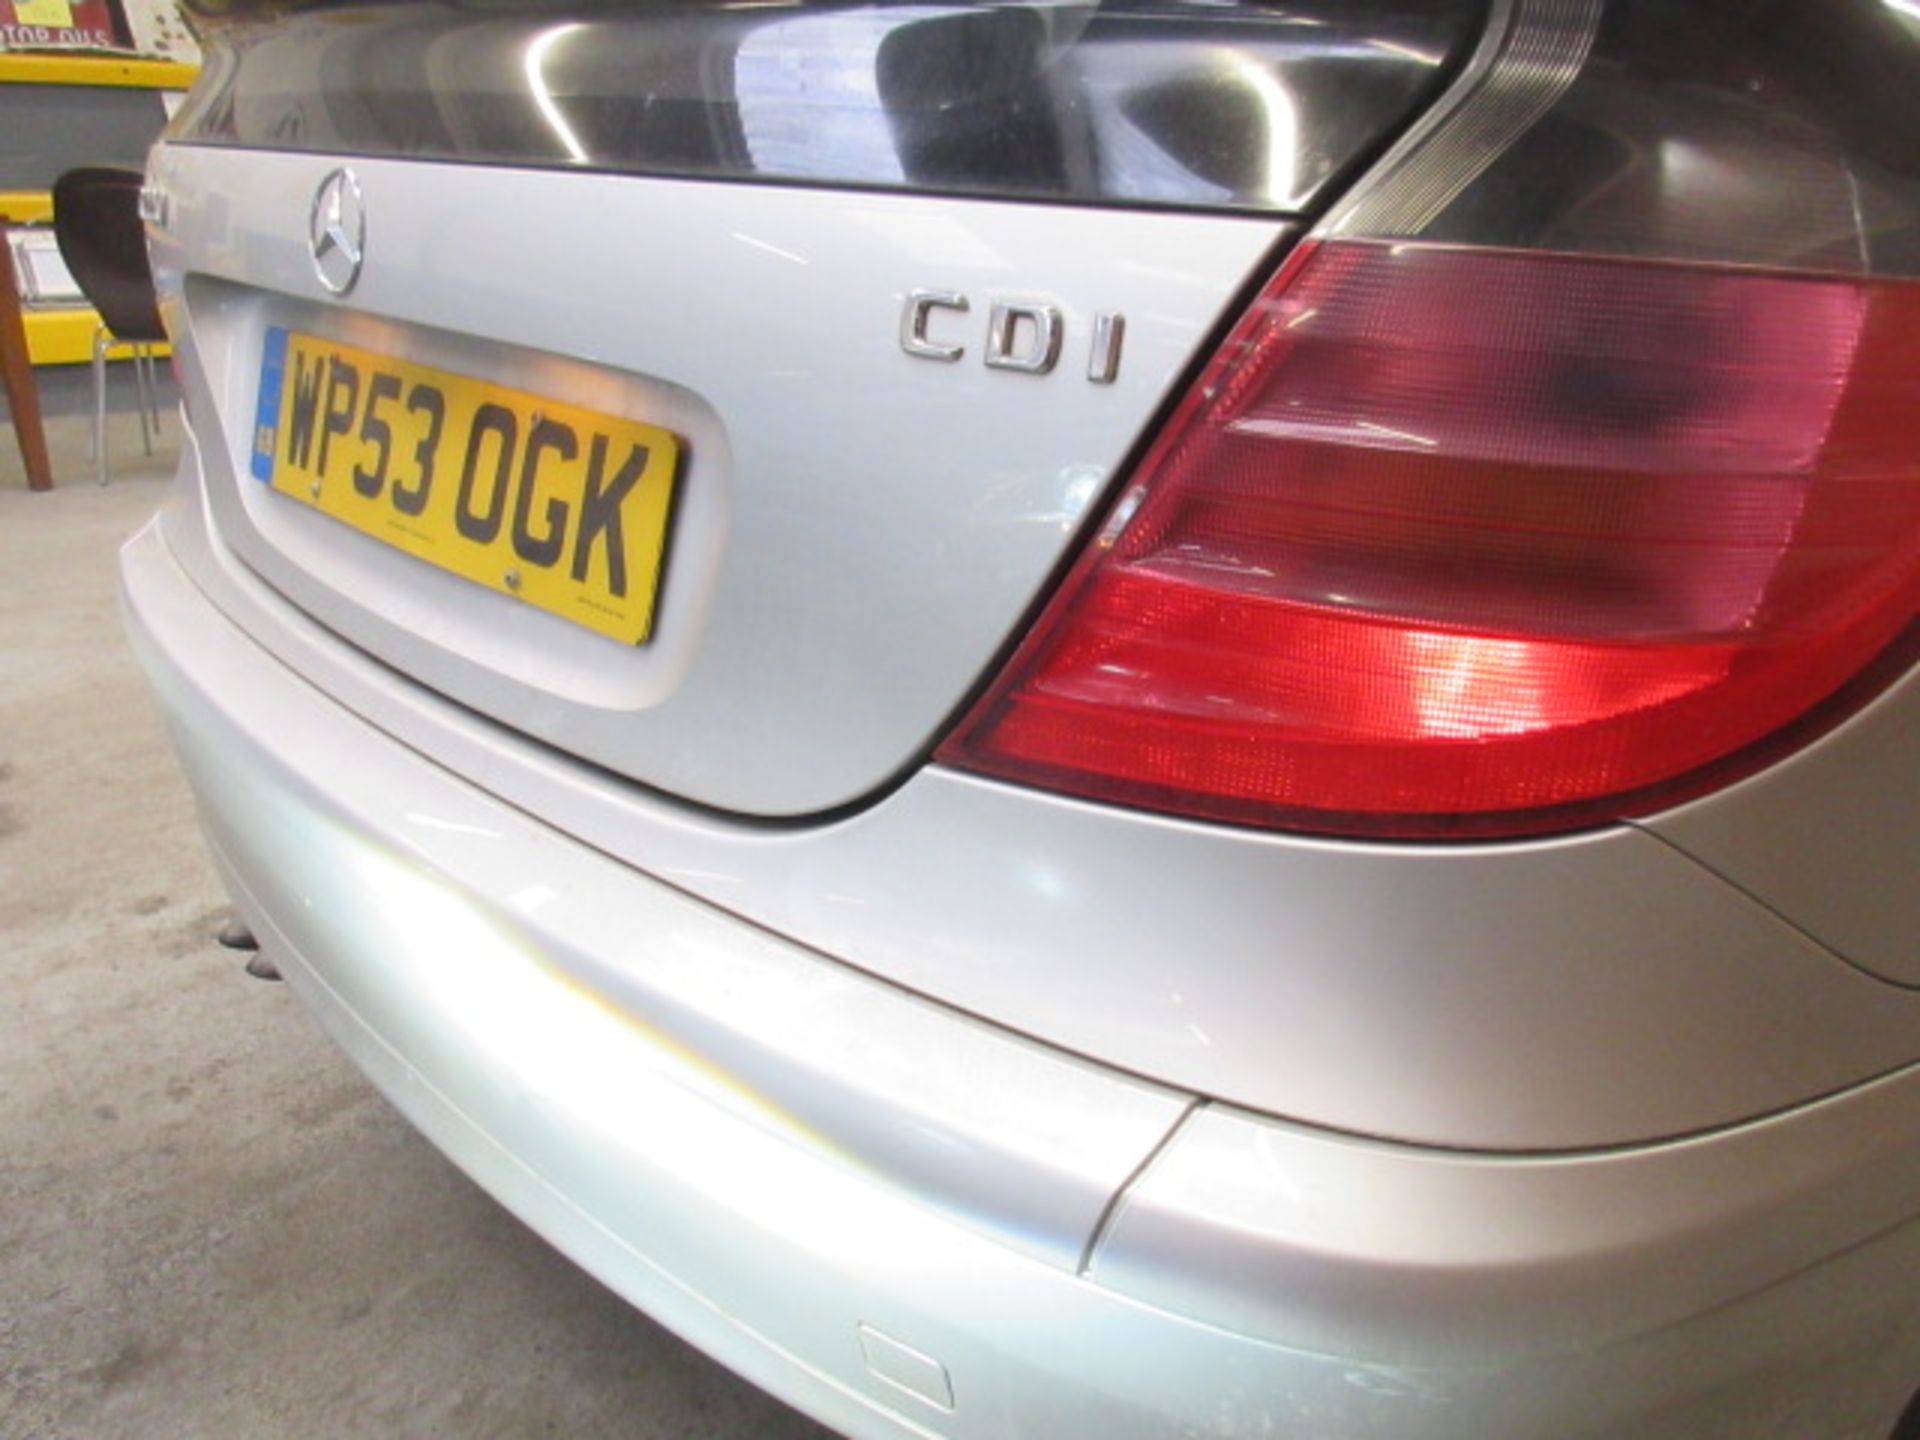 53 04 Mercedes C220 CDI Special Ed - Image 11 of 18